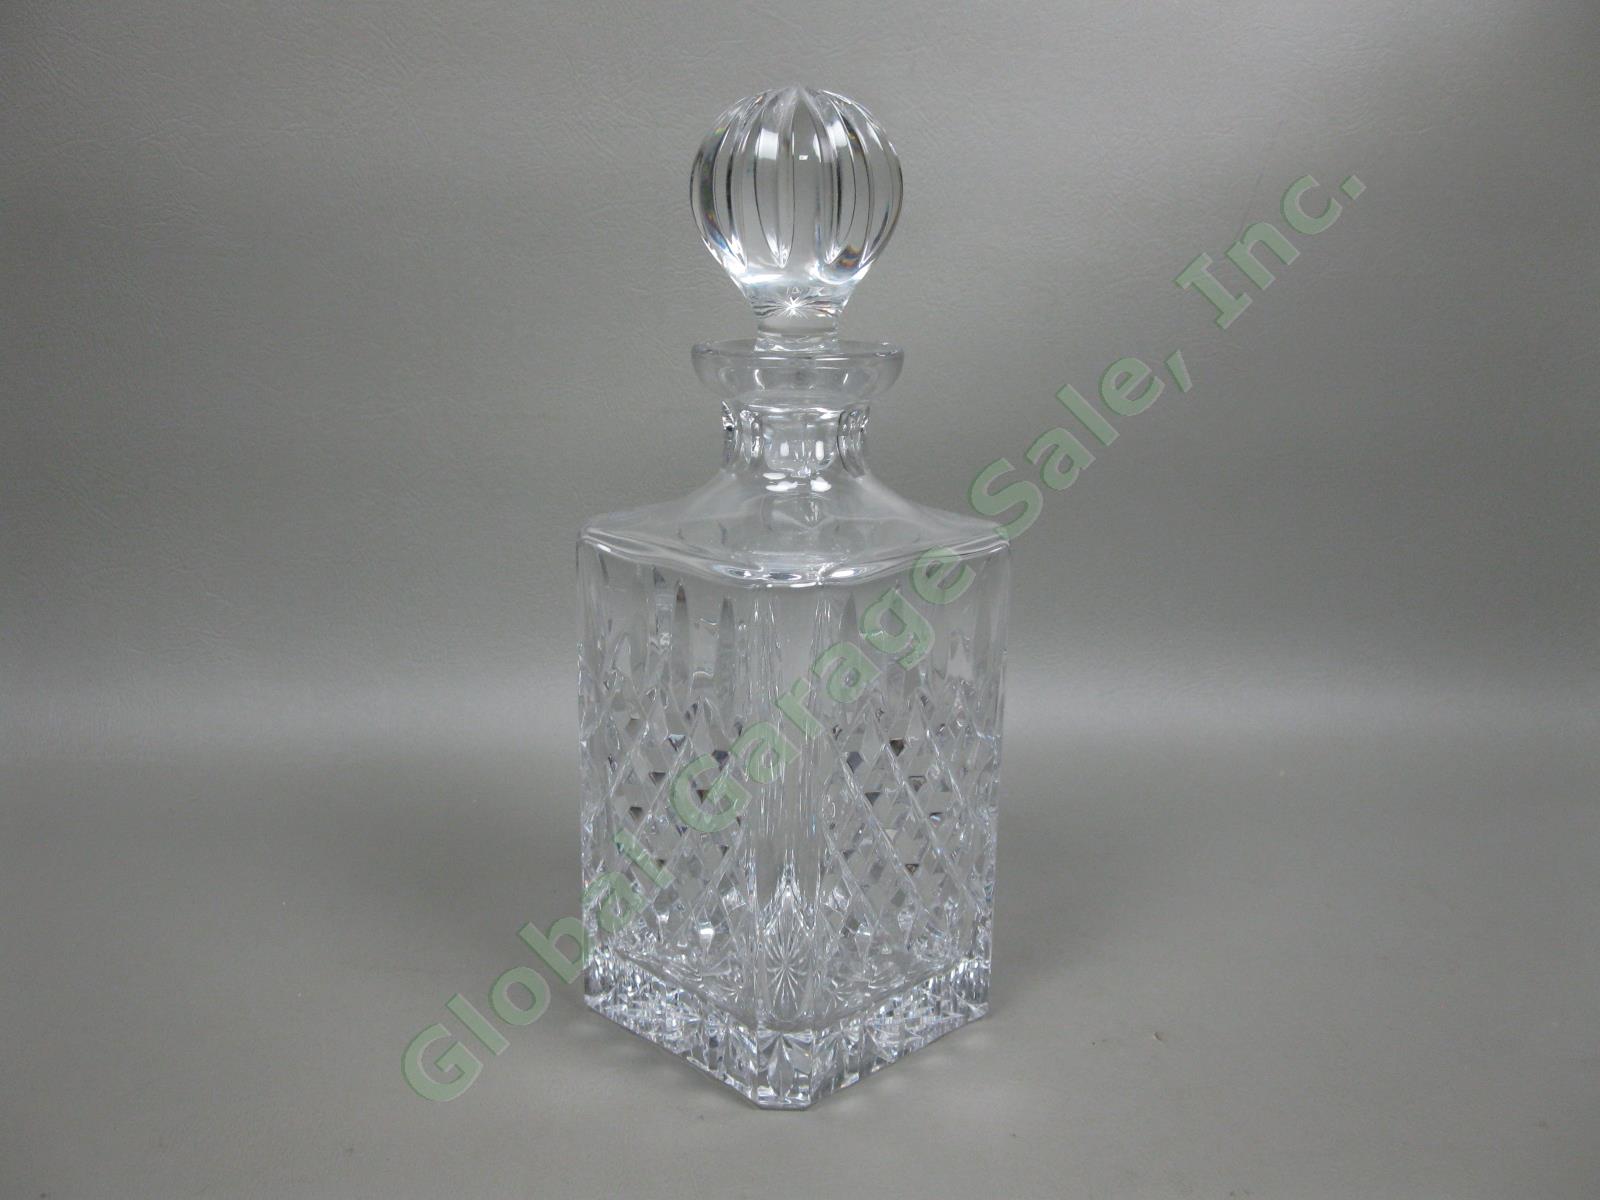 Vintage Waterford 10.75" Cut Crystal Rectangular Glass Liquor Decanter & Stopper